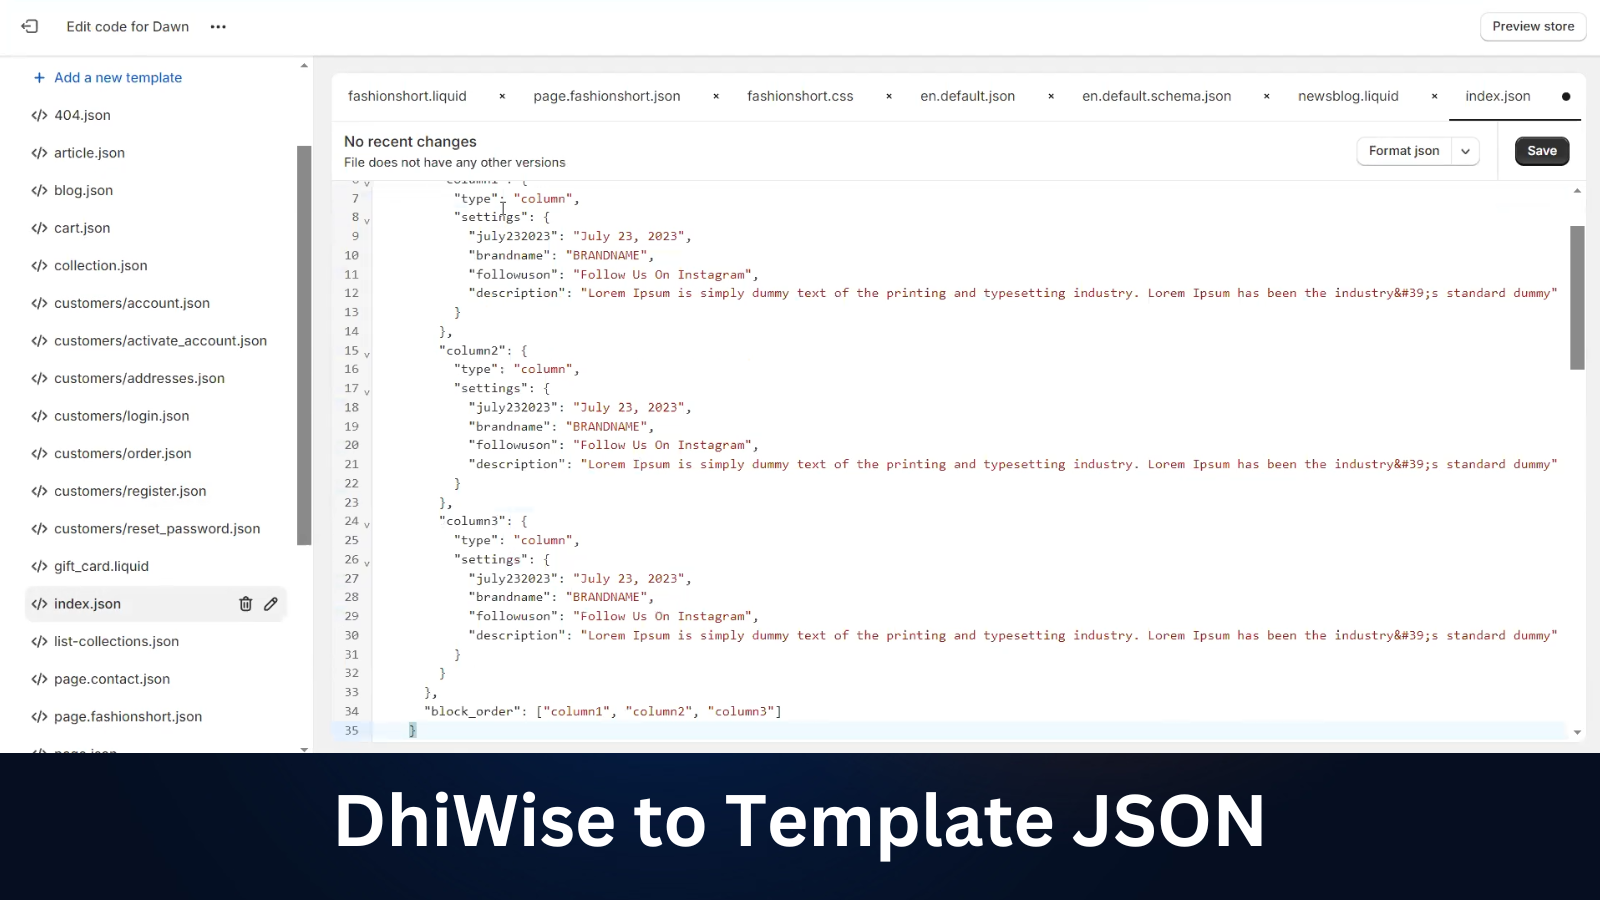 Template JSON generated by DhiWise